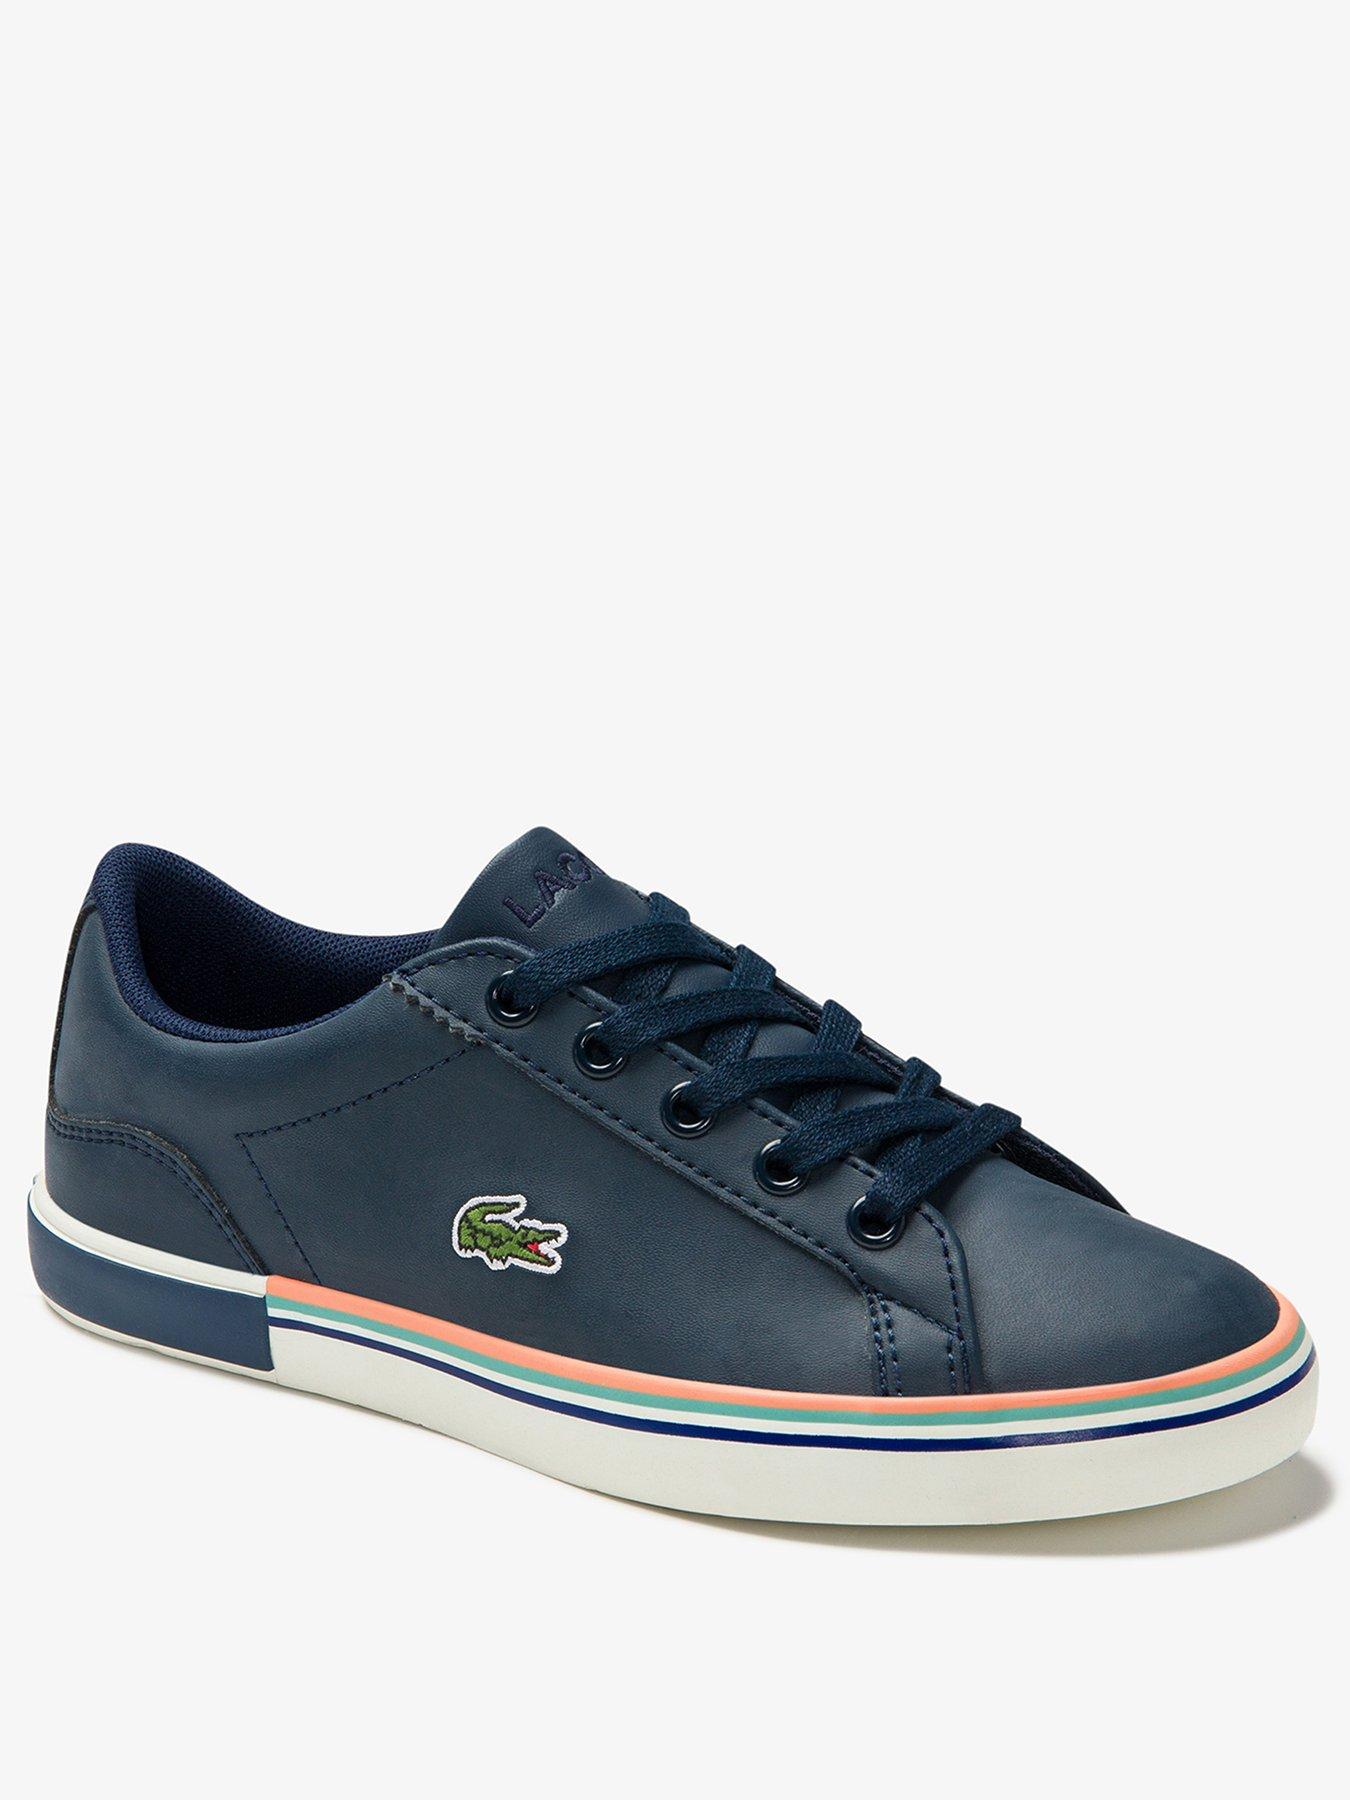 lacoste childrens trainers uk